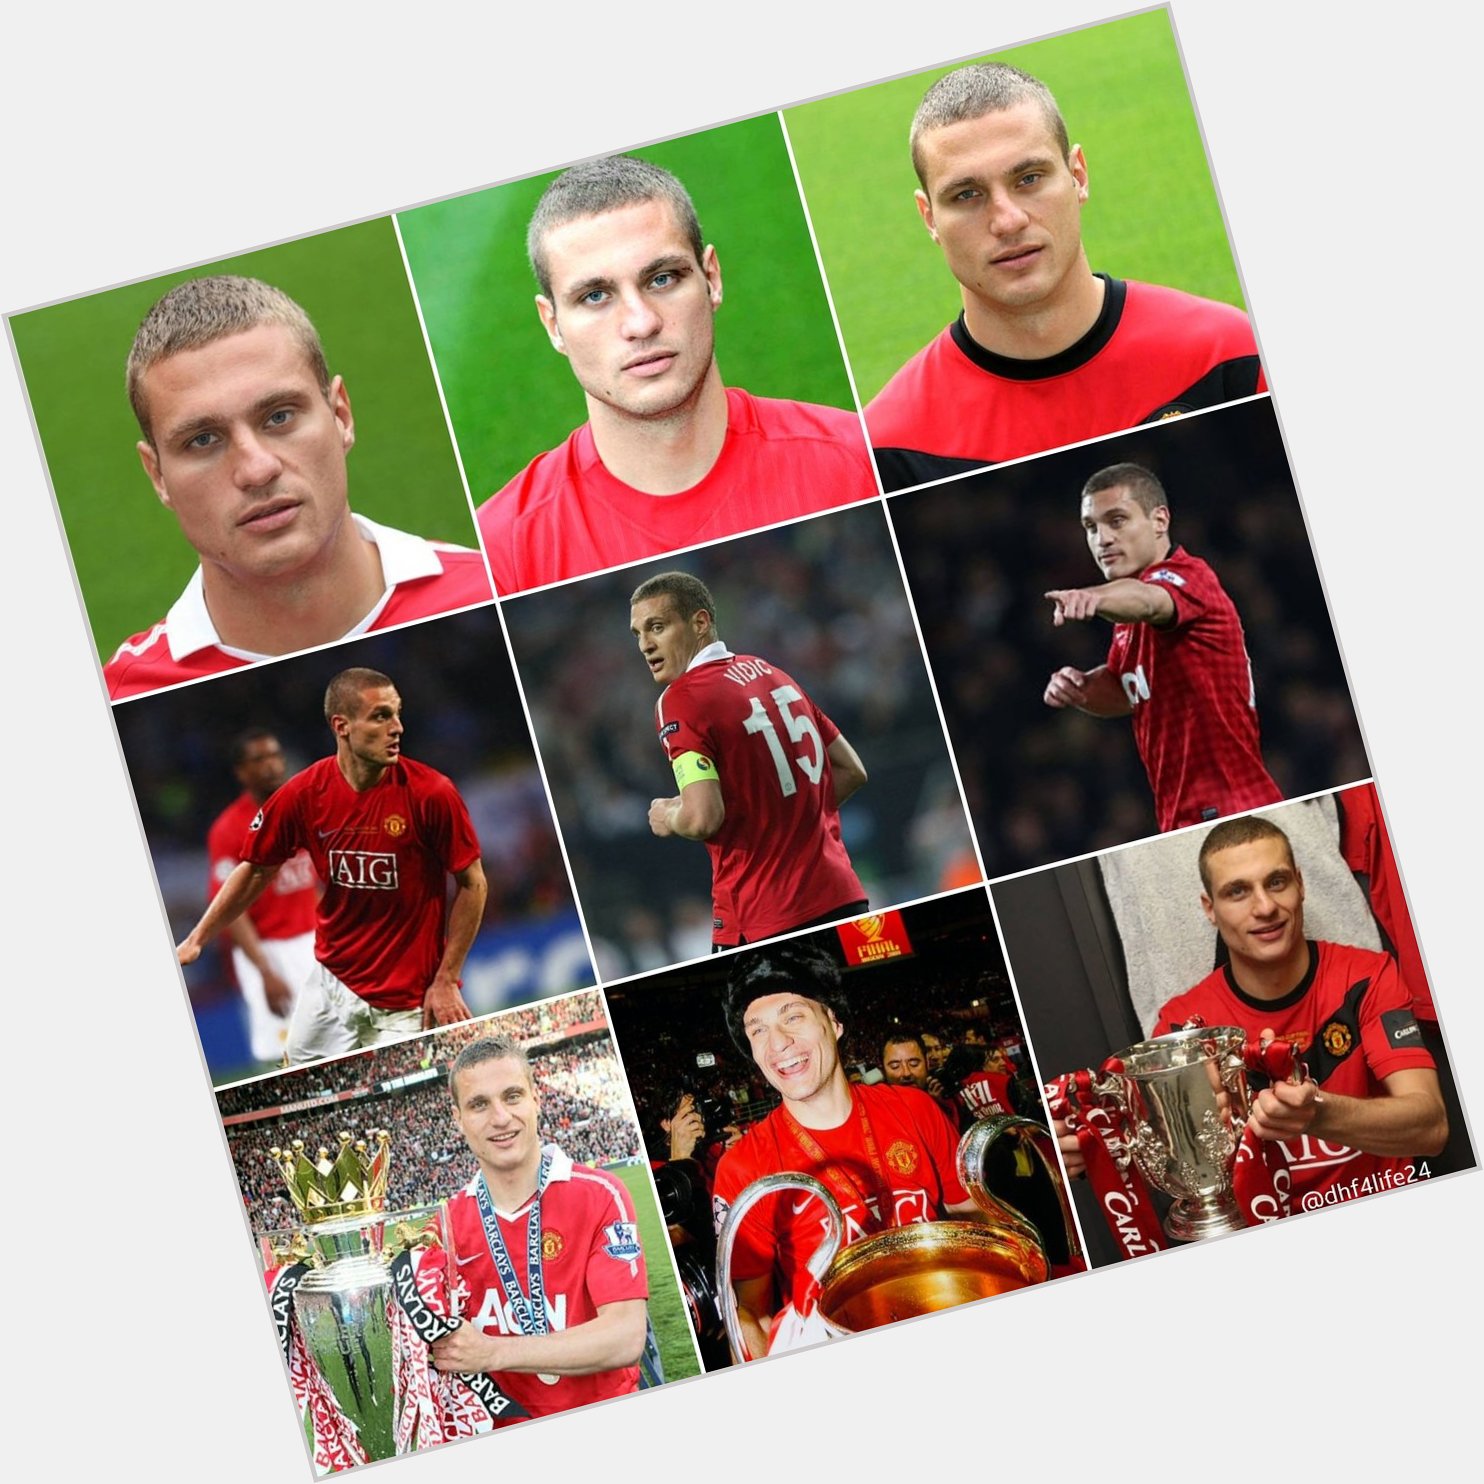 Happy 41st Birthday   on 21st October 2022 to Nemanja Vidic - What a Player, Captain and LEGEND... 